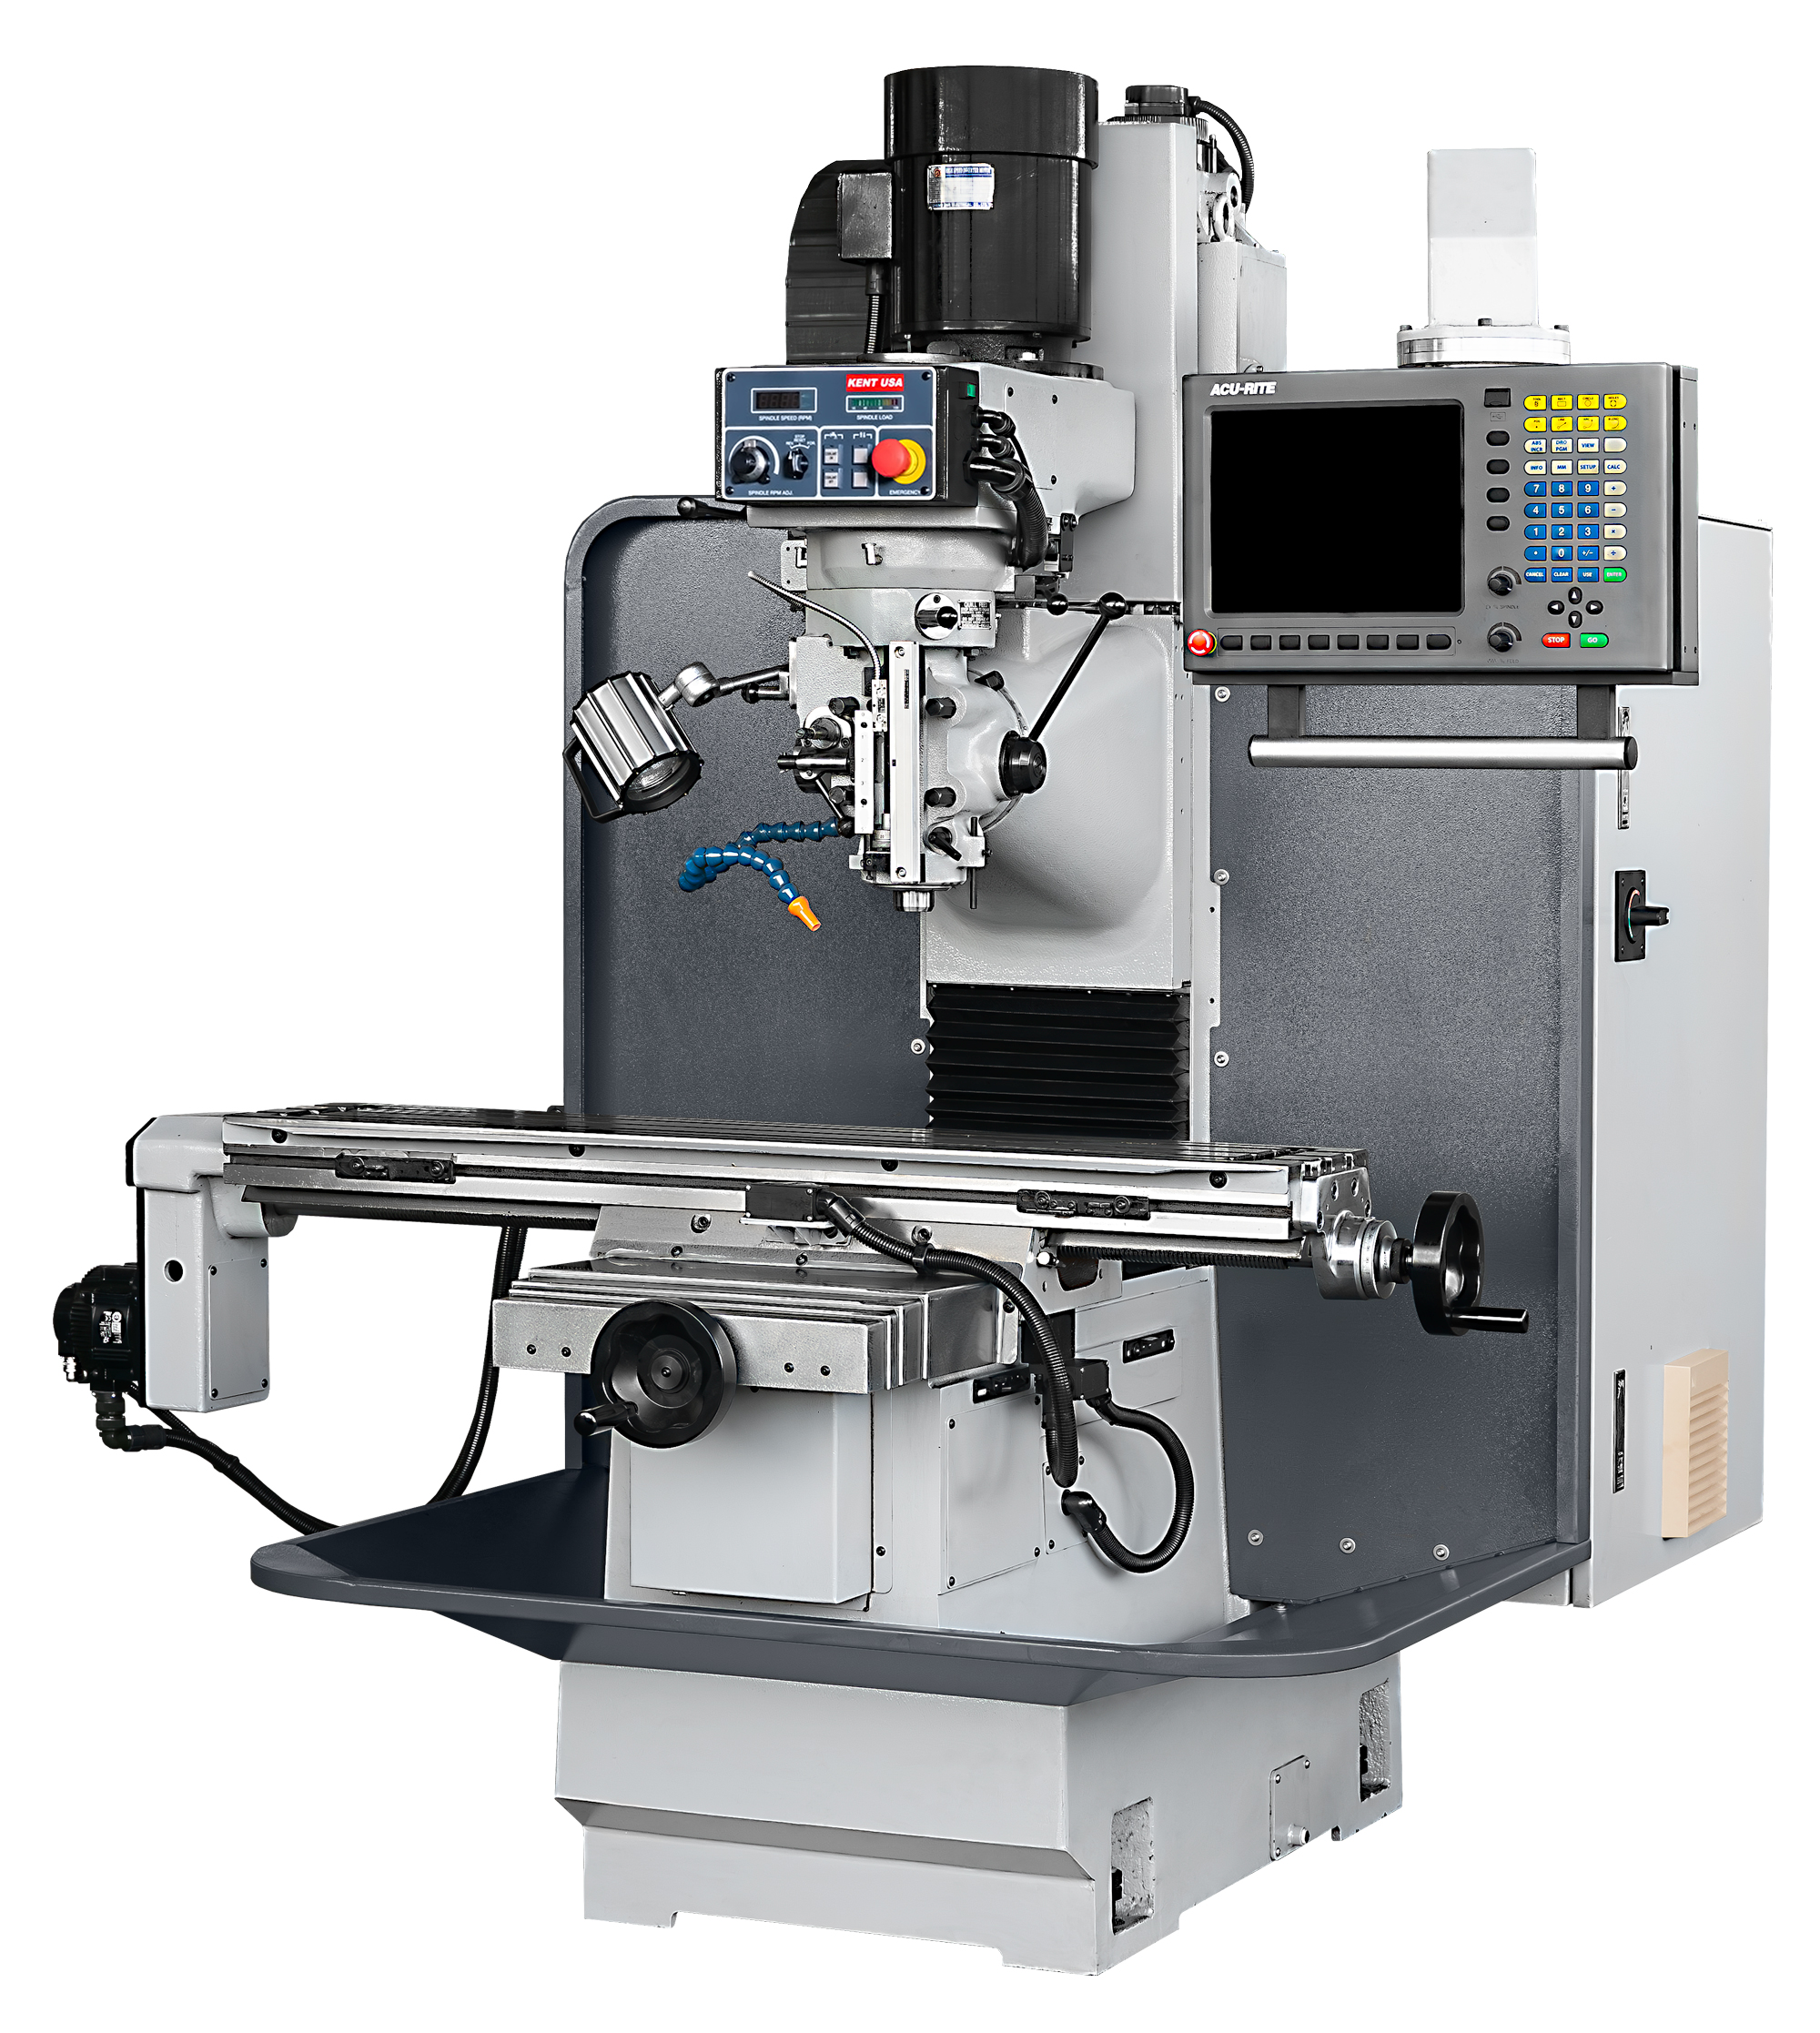 KENT USA BM-3-CNC-Bed-Mill with Acu-Rite MILLPWR G2 Control